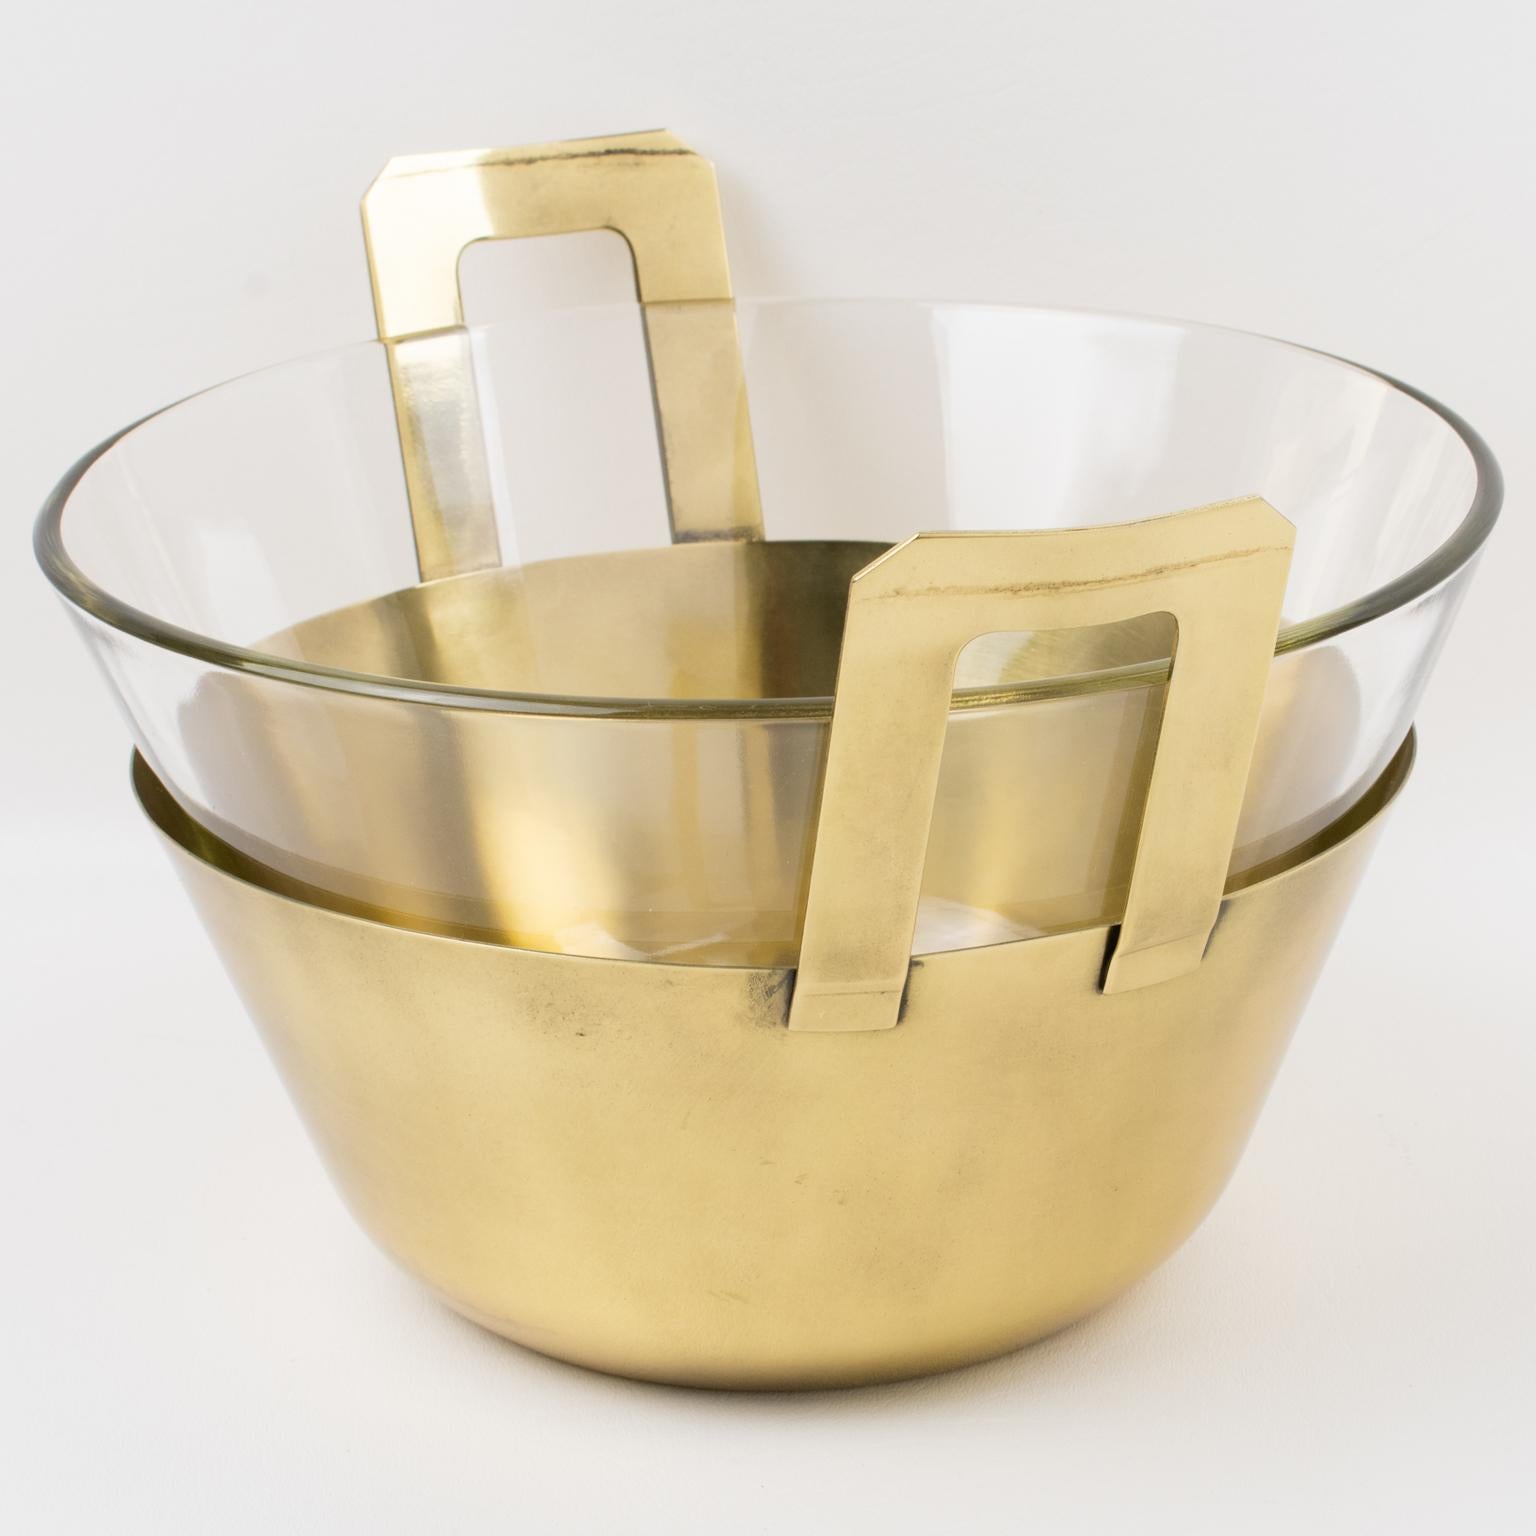 This elegant gilt metal decorative bowl or centerpiece, crafted in Italy in the 1980s, features a modernist rounded shape with a glass insert and tall raised handles. The glass container can be removed from the bowl for cleaning purposes. Marked